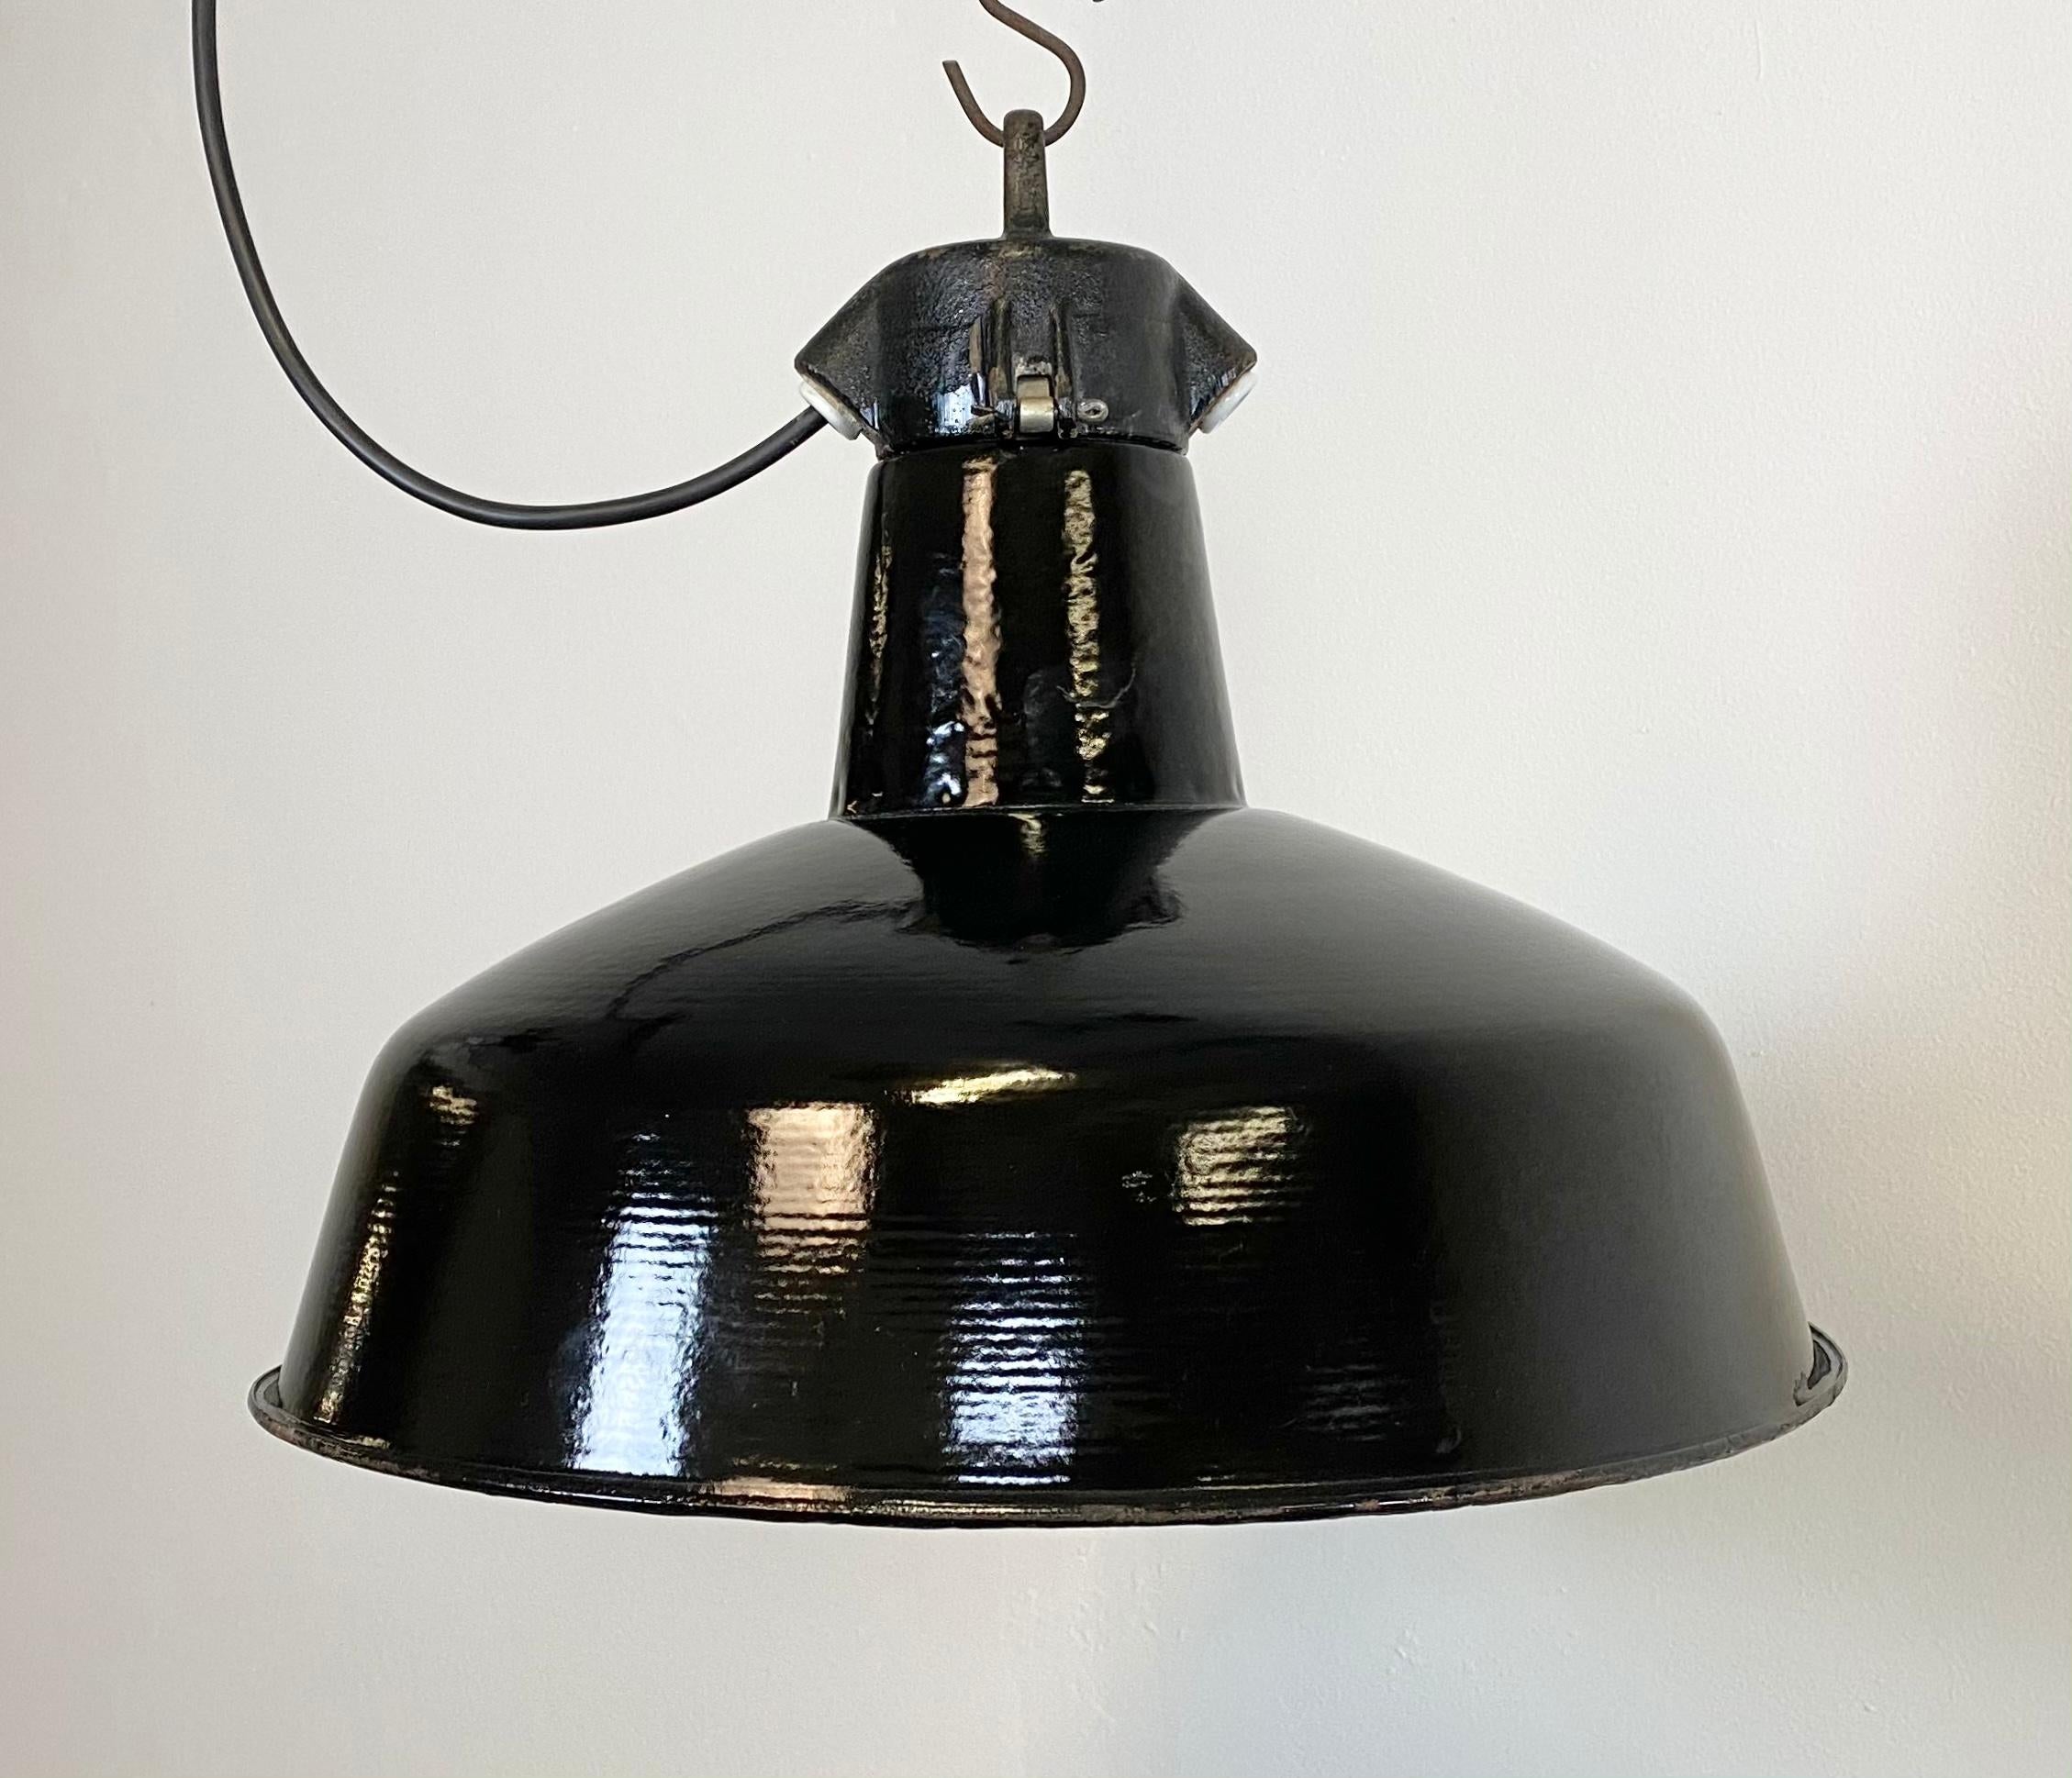 Industrial hanging light manufactured in former Czechoslovakia during the 1950s. It features a black enamel shade with white enamel interior and cast iron top. Porcelain socket for E 27 light bulbs and new wire. The weight of the lamp is 2 kg. The